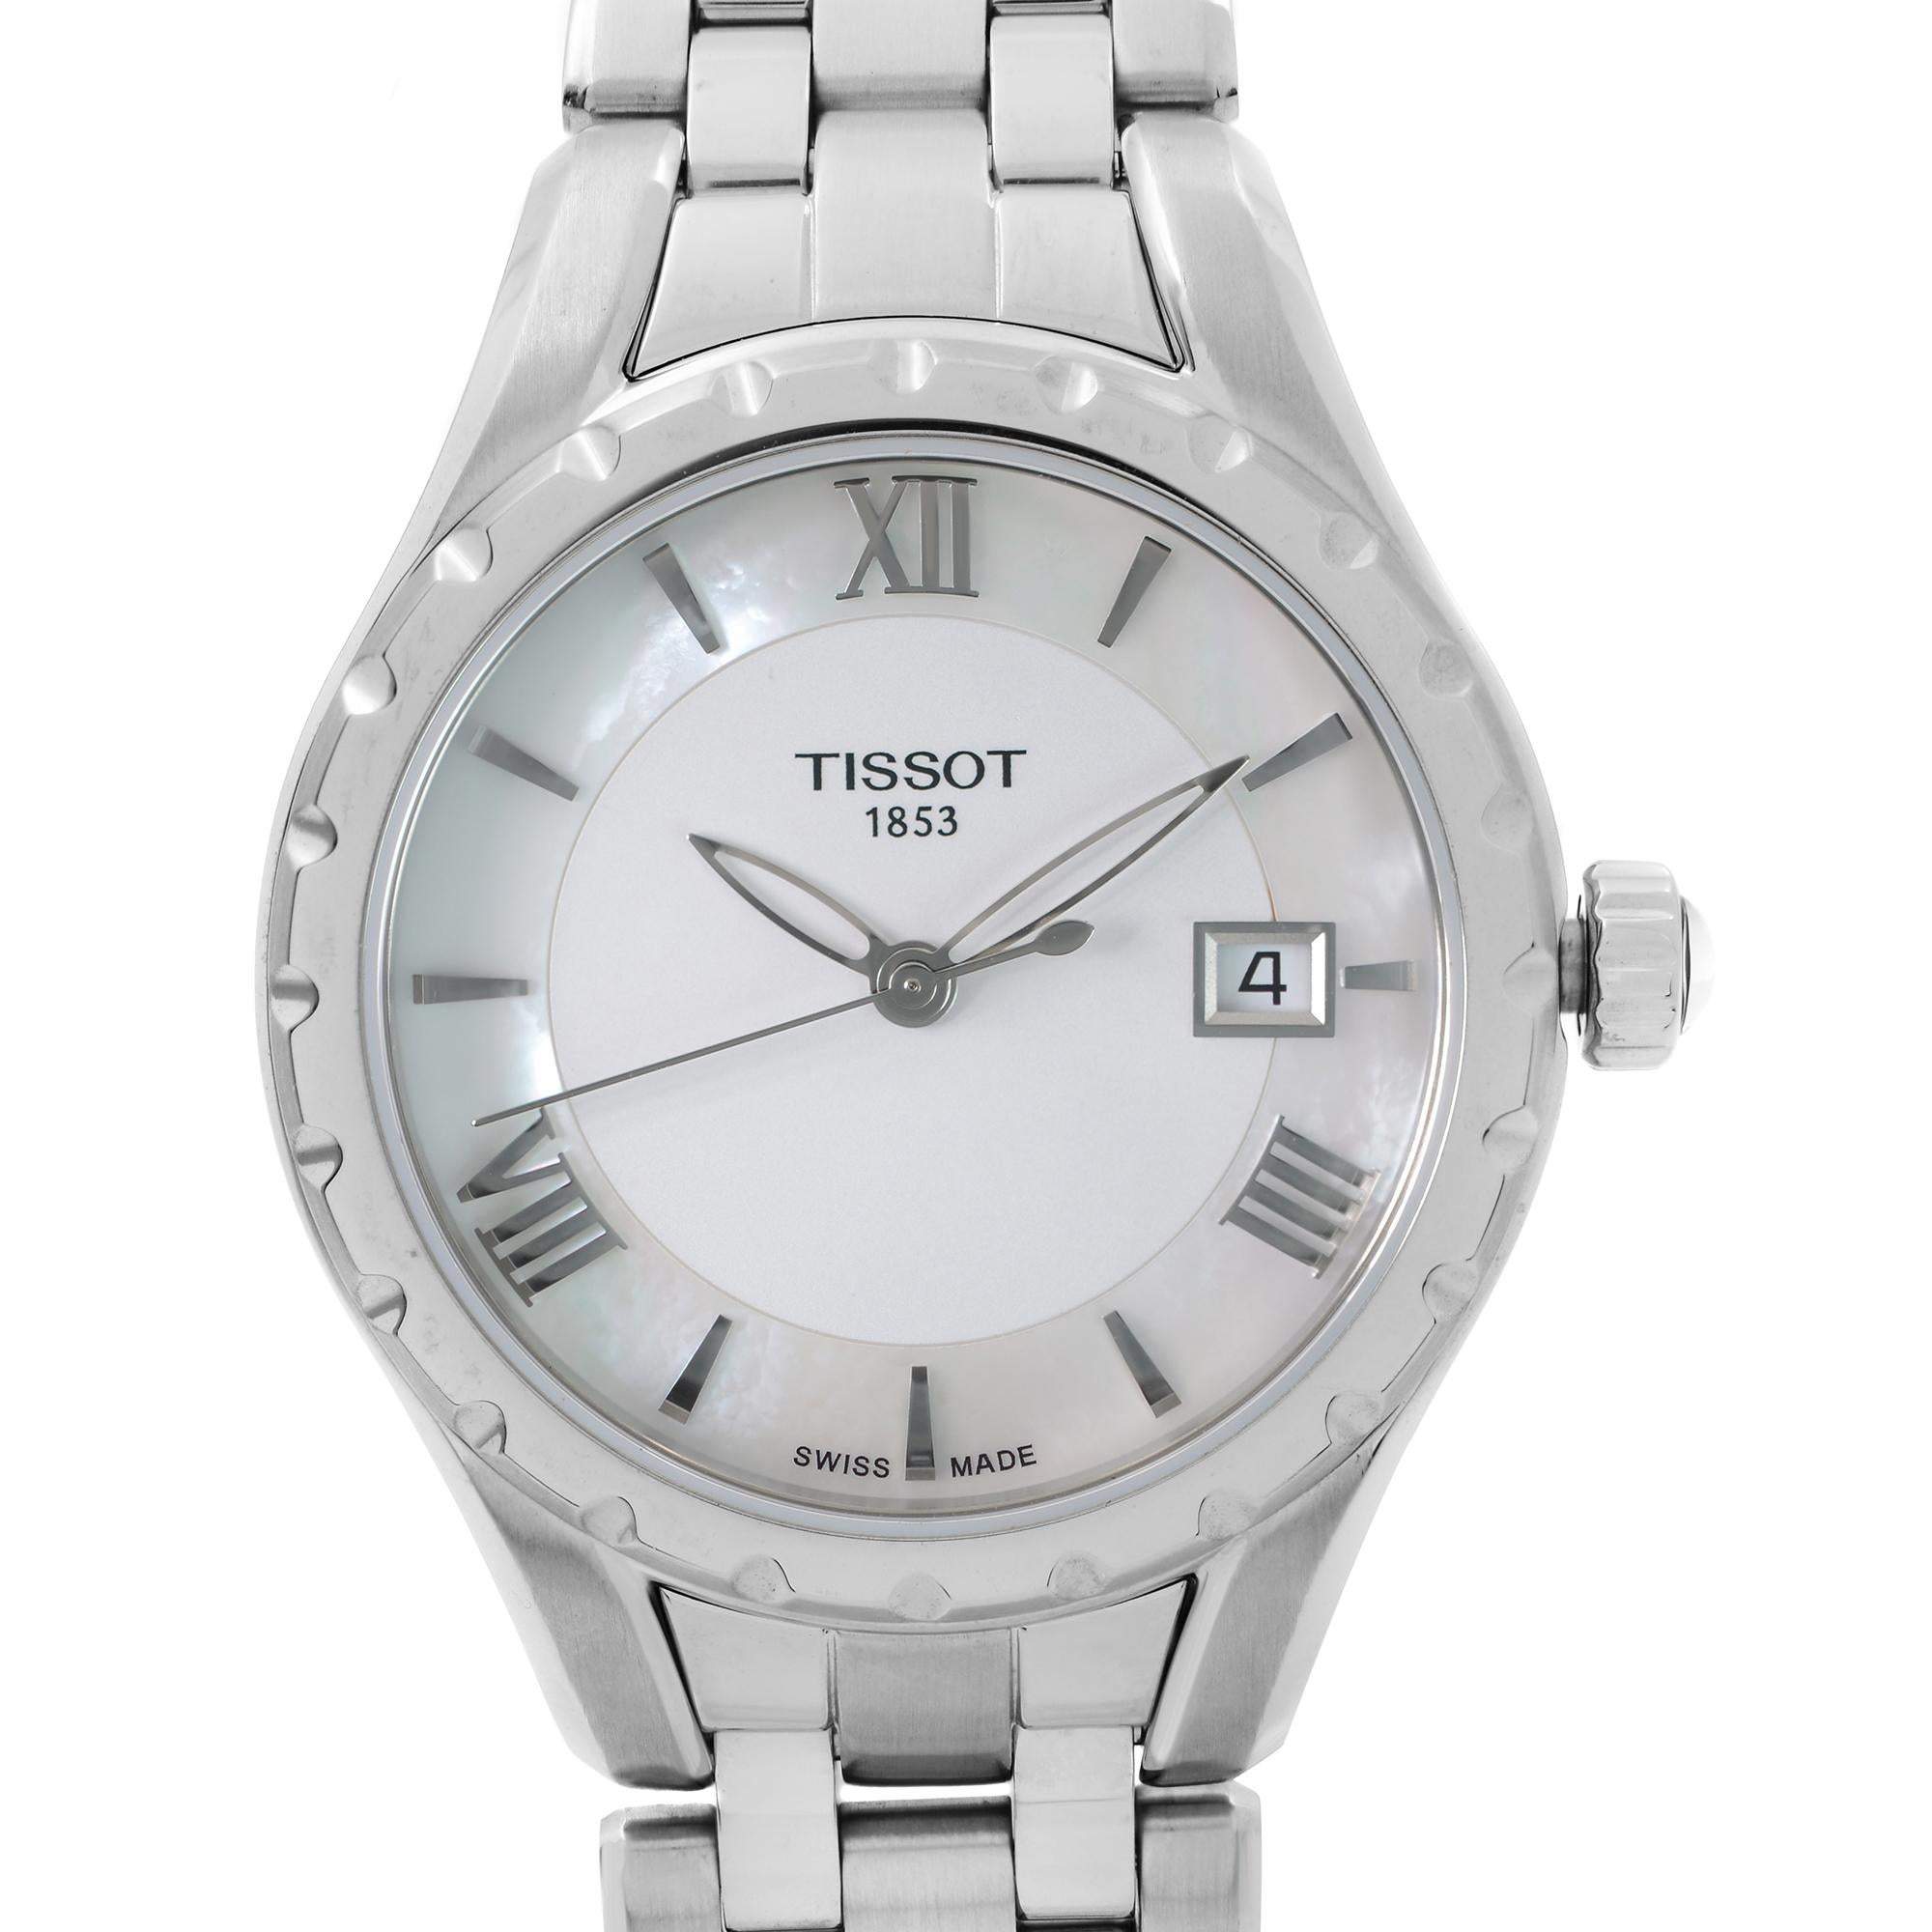 Unworn Tissot T-Lady Quartz Ladies Watch T072.210.11.118.00. This Beautiful Timepiece is Powered by Quartz (Battery) Movement And Features: Stainless Steel Case and Bracelet, White Mother of Pearl Dial with Silver-Tone Hands and Index Hour Markers.